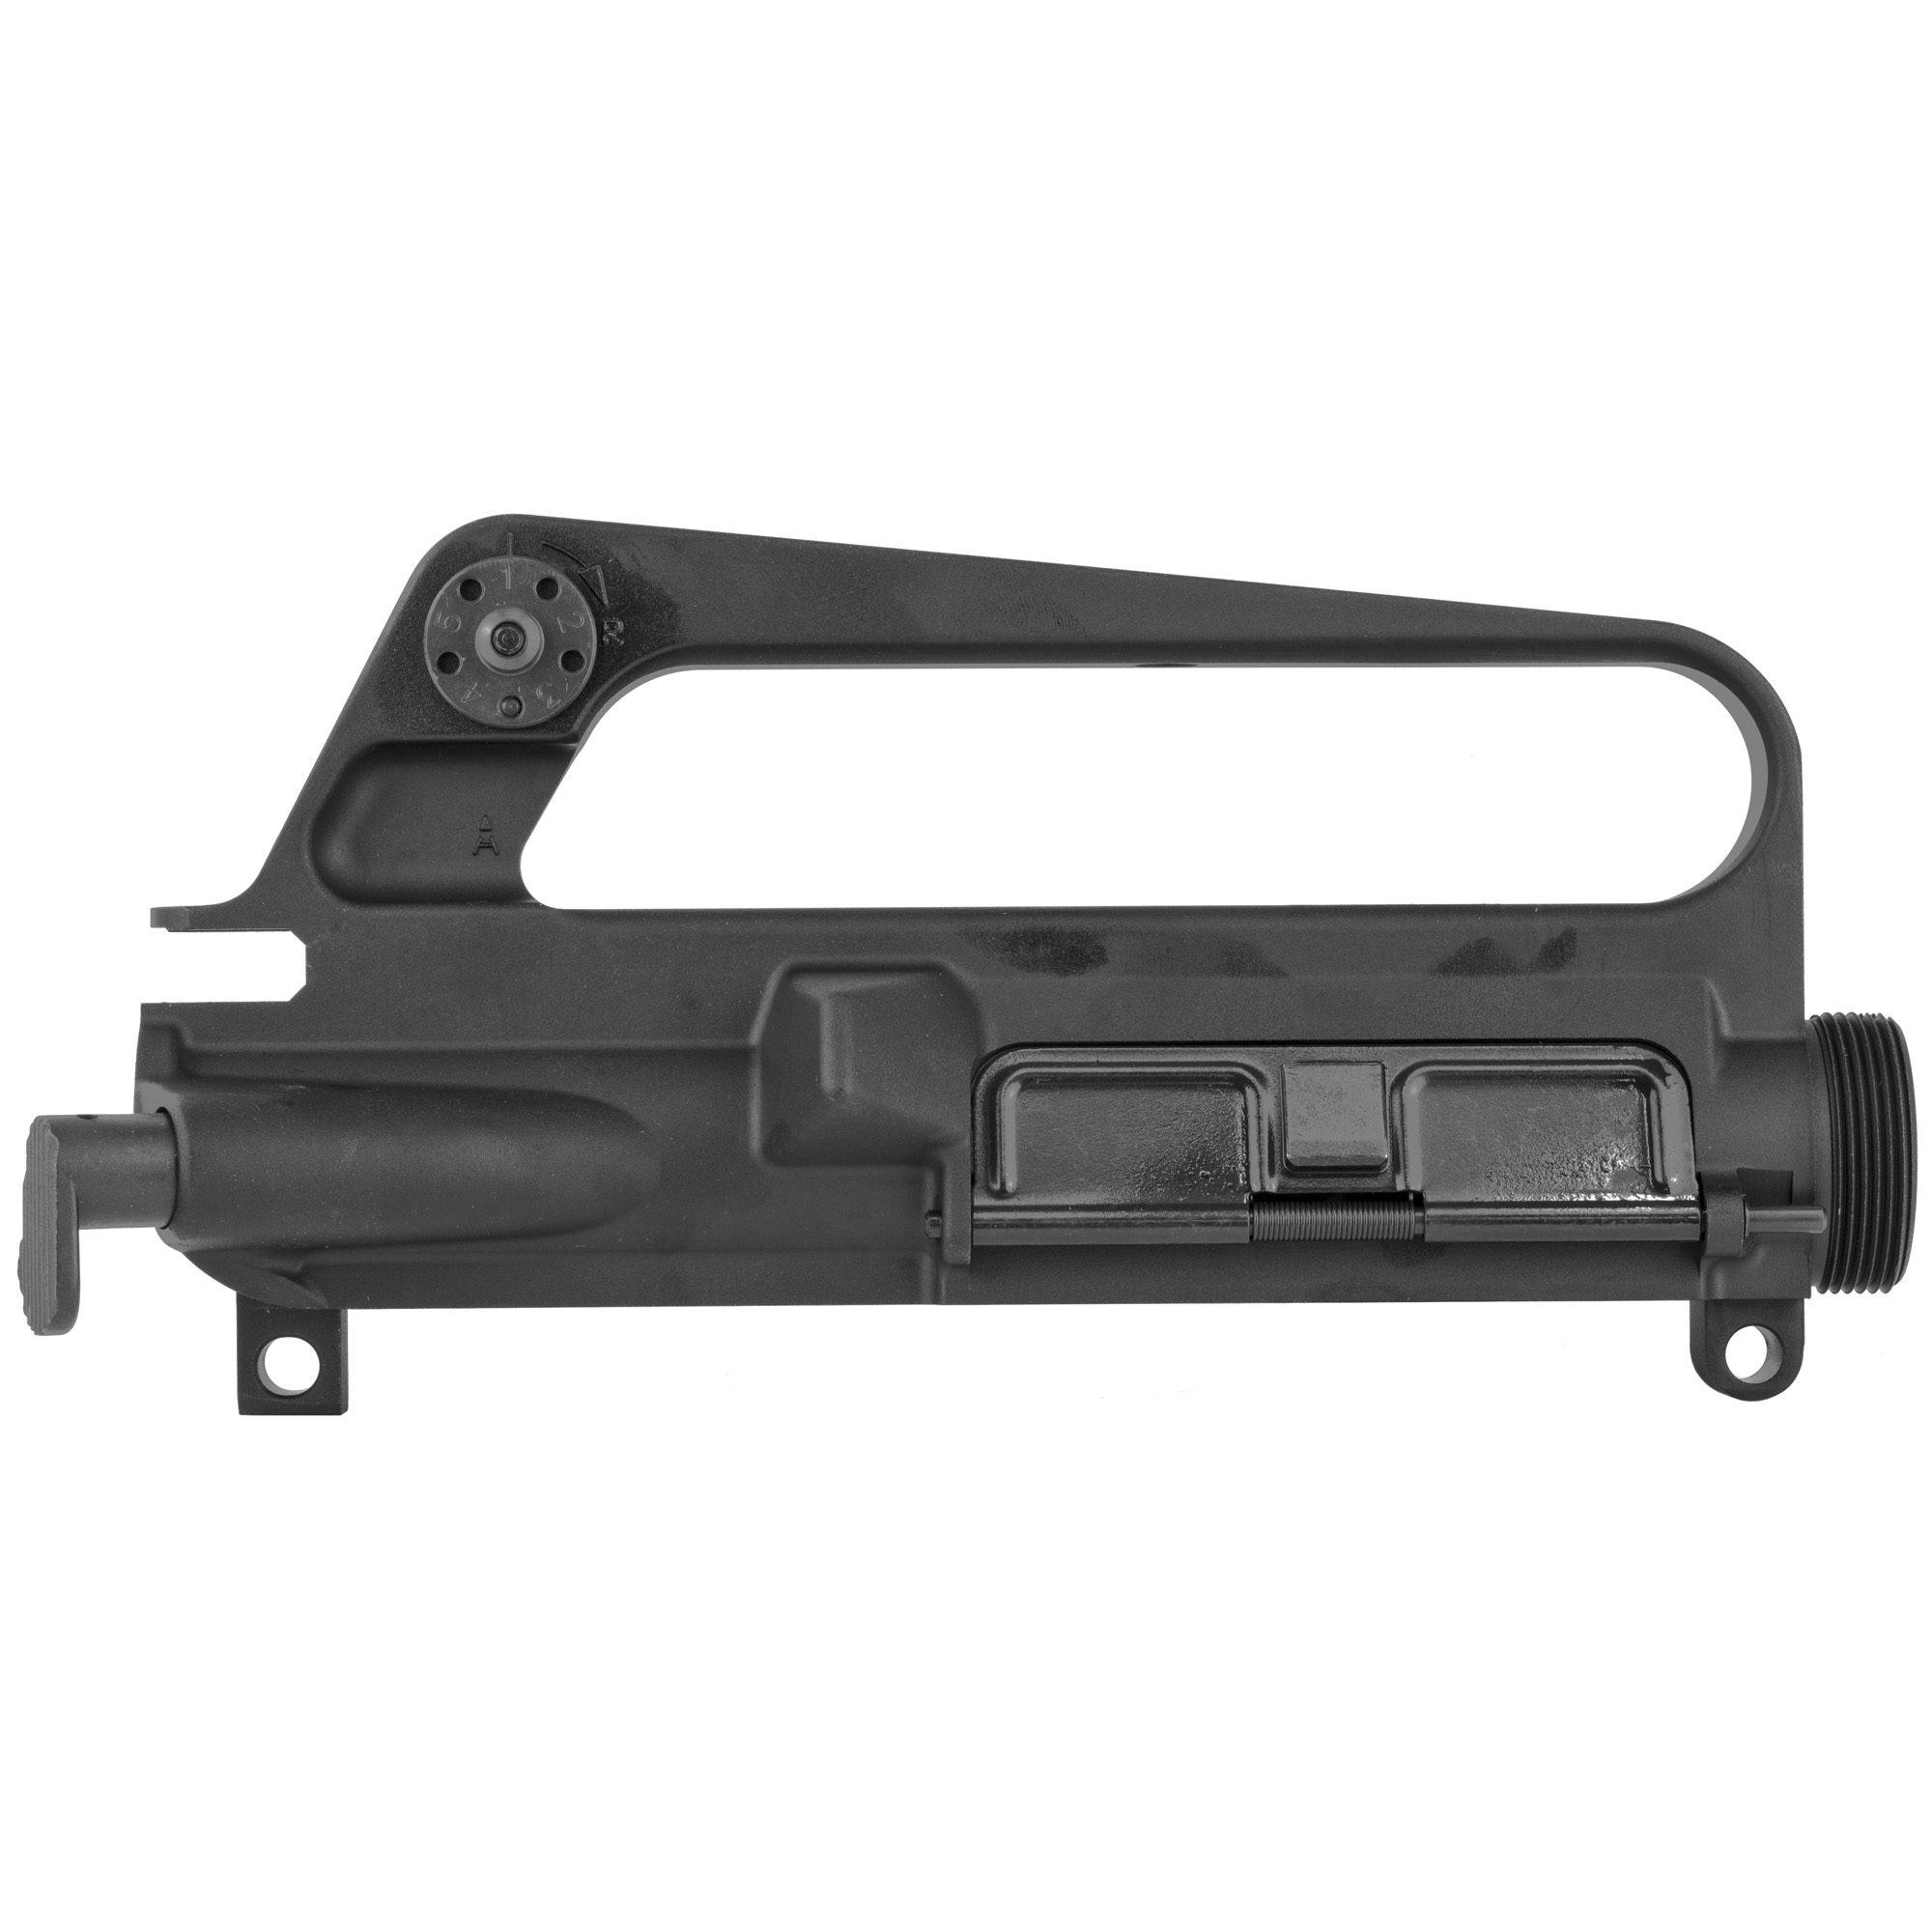 A1/C7 Complete Upper Receiver (fixed carry handle)